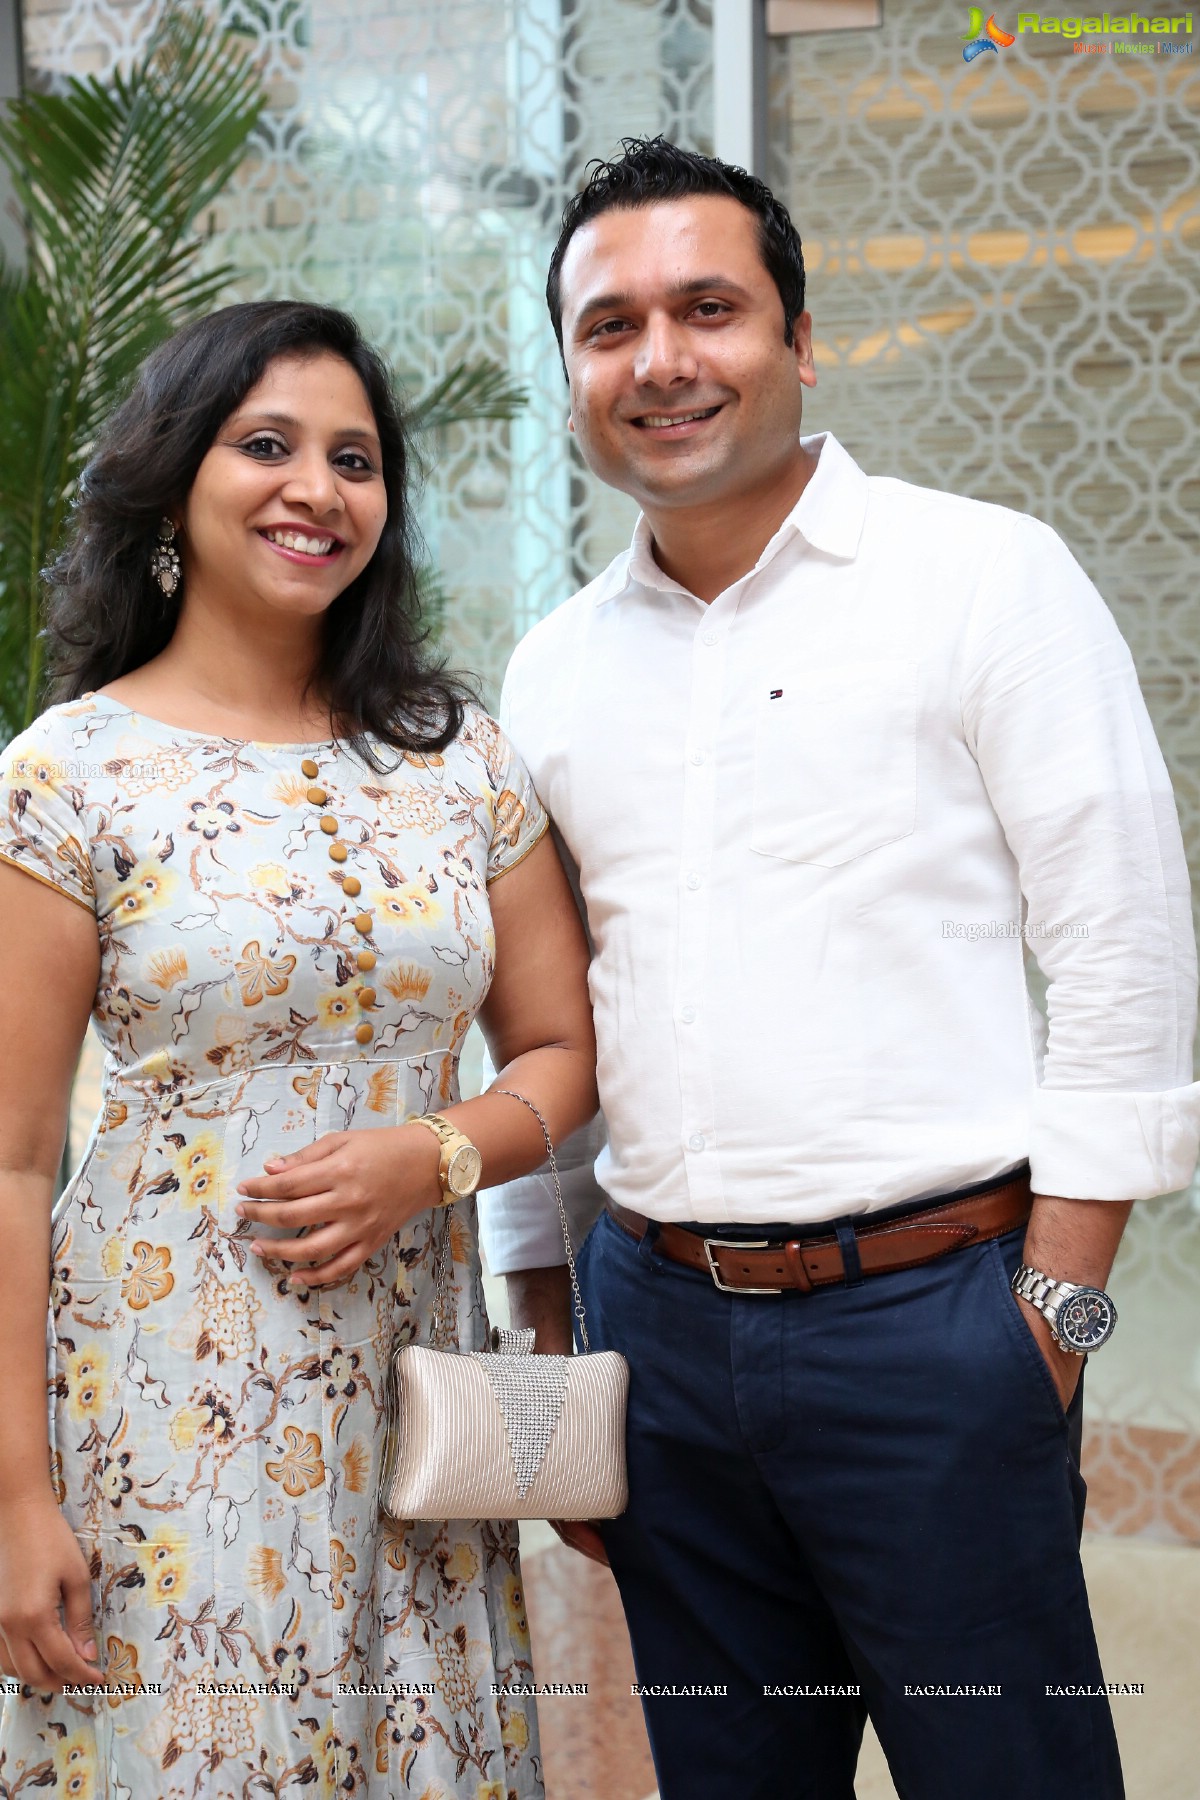 Grand Launch of Martini - The Hospitality Journal at Sheraton, Hyderabad